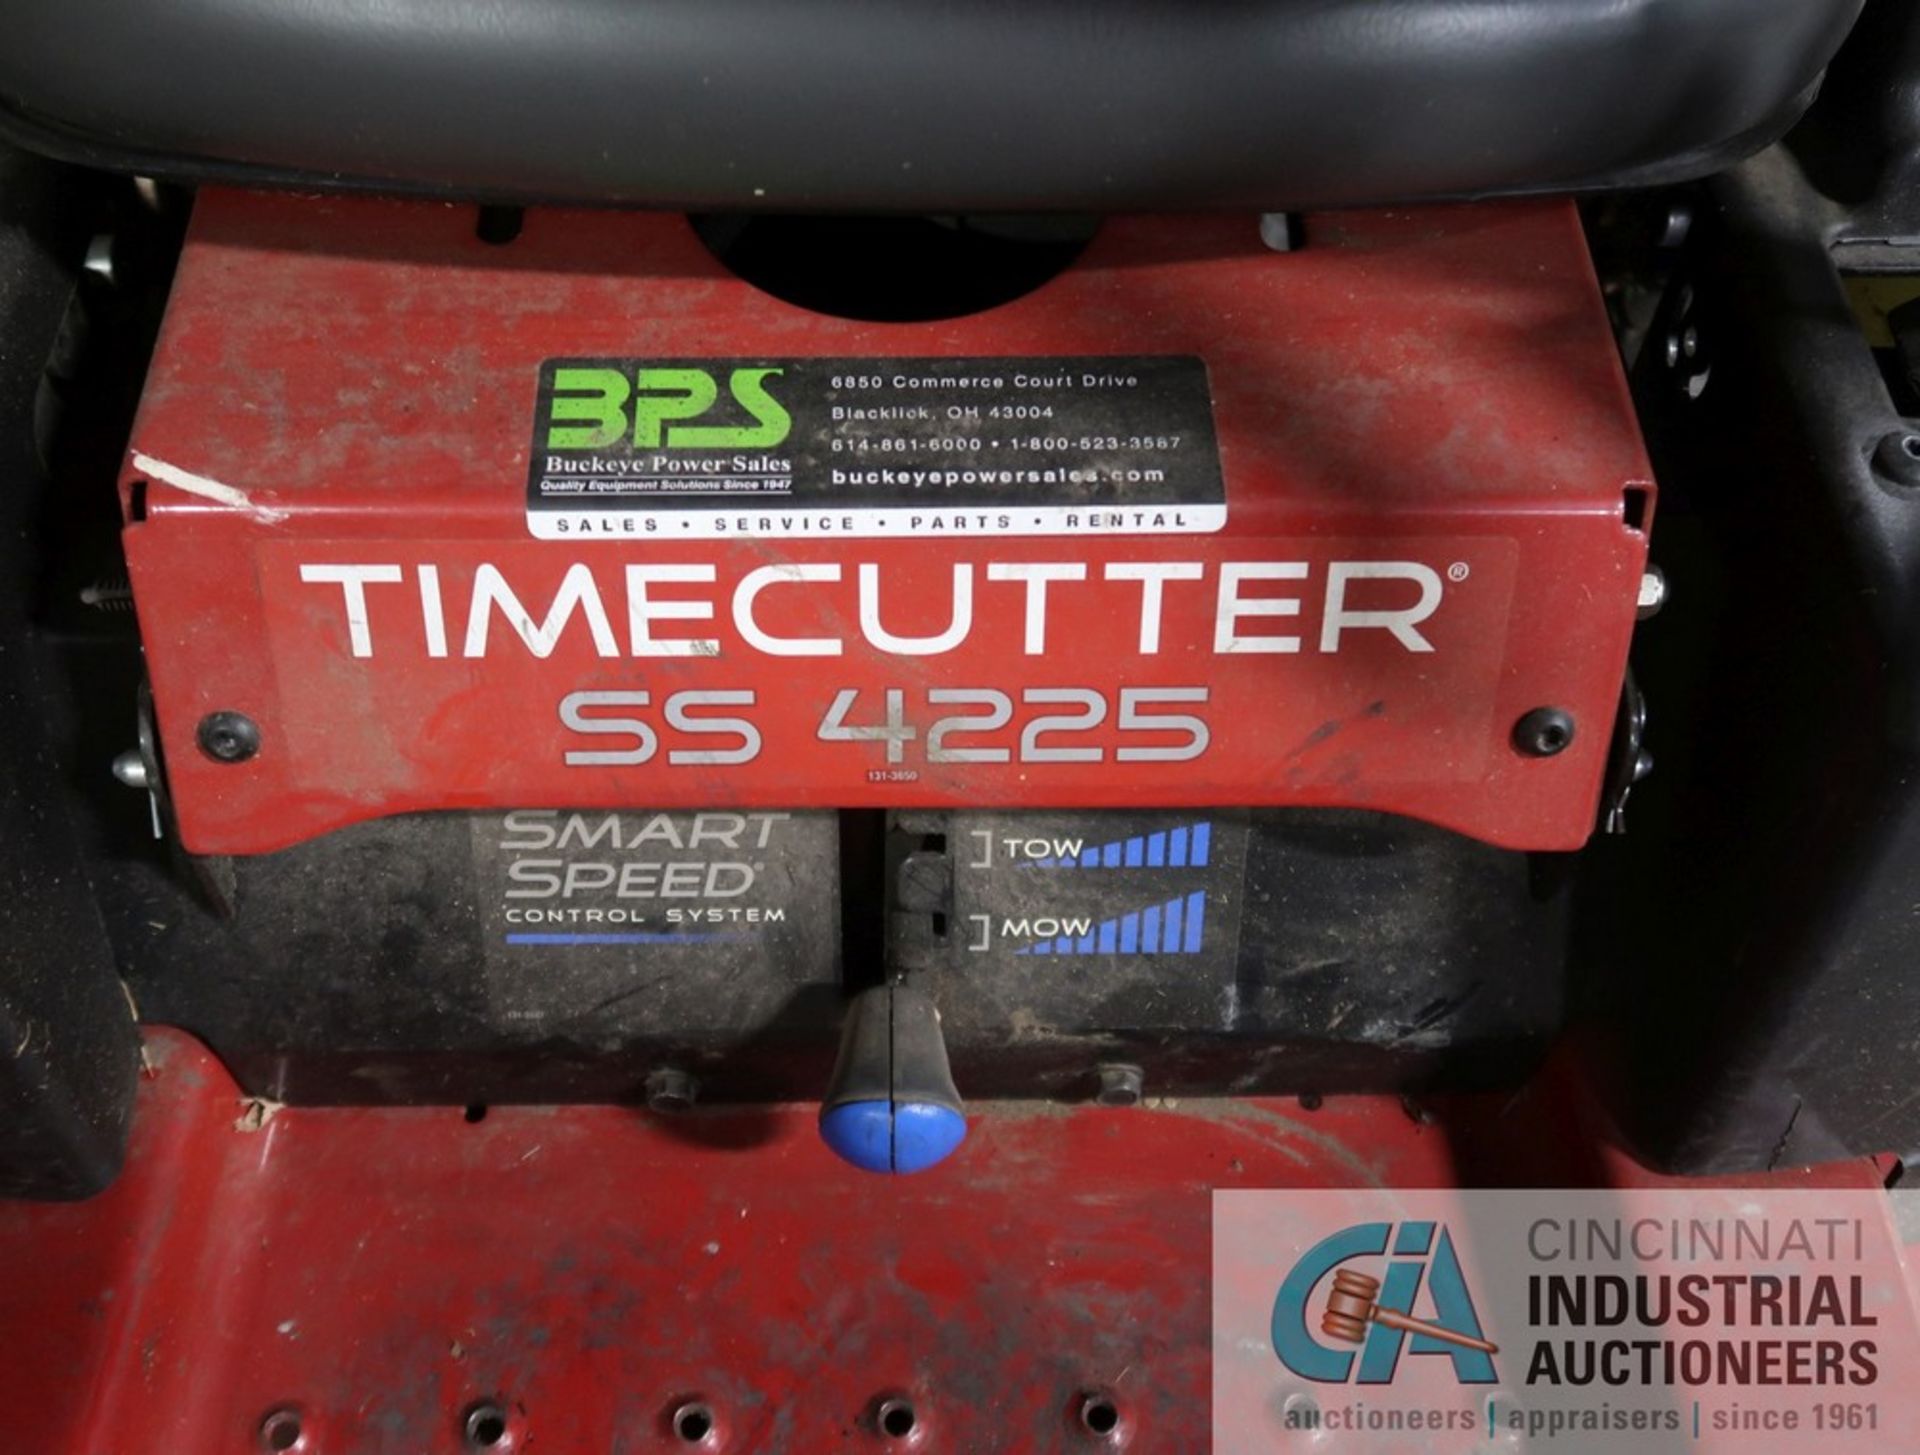 42" TORO TIME CUTTER MODEL SS4225, 22.5 TWIN V GAS POWERED COMMERCIAL ZERO TURN MOWER - Image 4 of 4